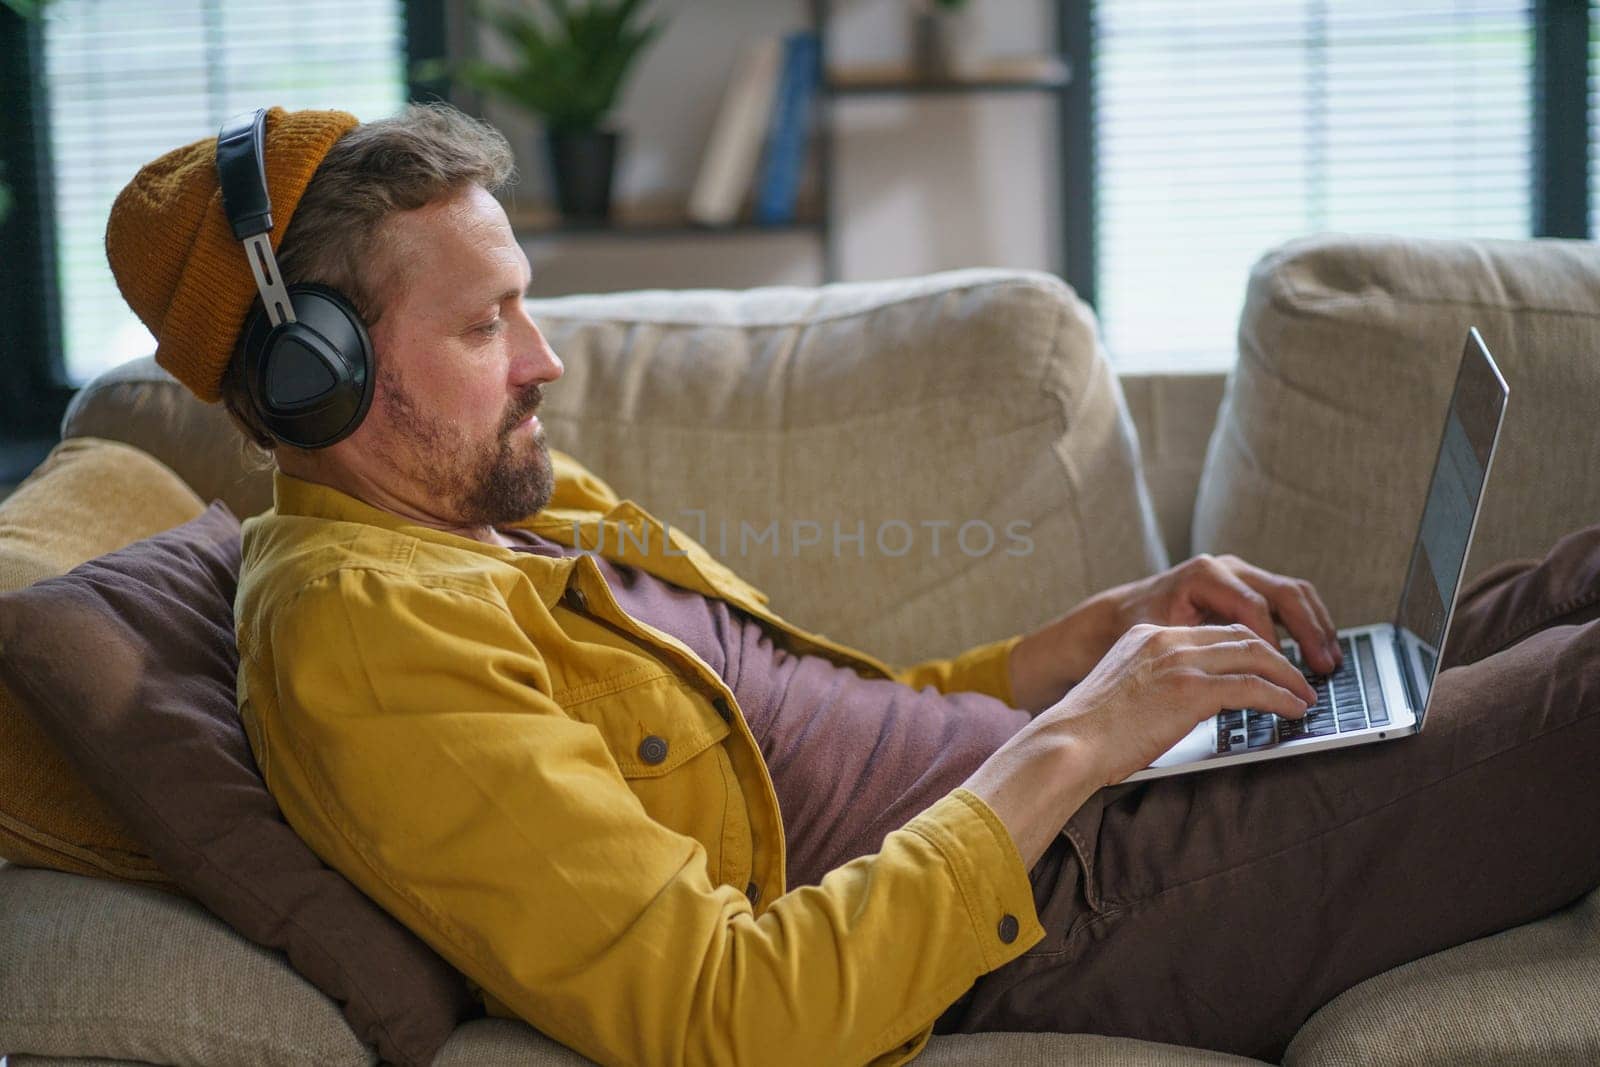 Young man in casual clothing sitting on sofa home, playing online game on laptop. He is fully concentrated on game, wearing headphones and using the keyboard to control action on screen. by LipikStockMedia